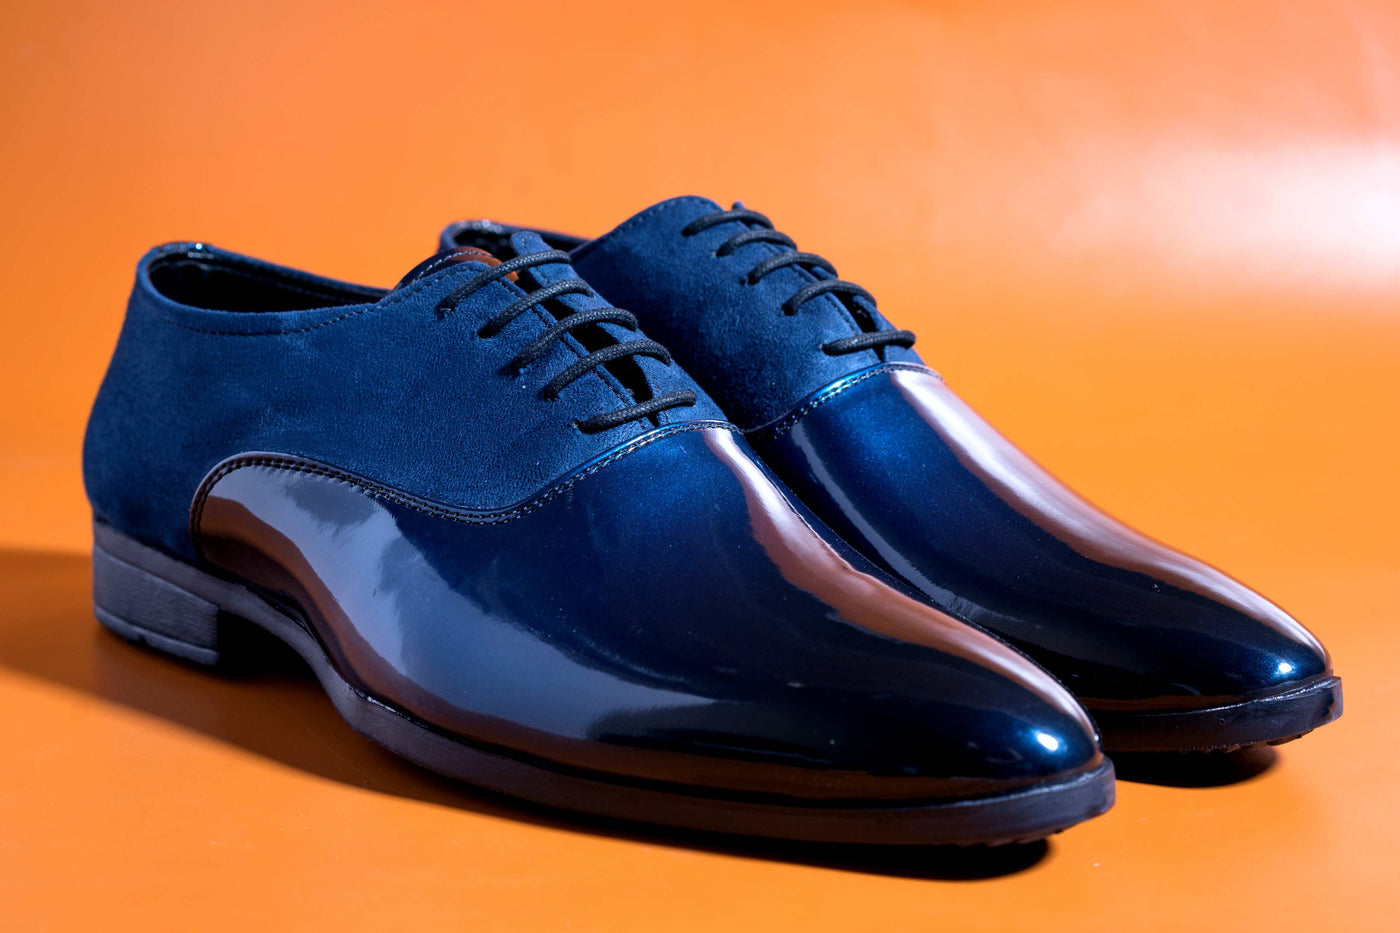 New Fashion Elegant And Classy Shiny Blue Formal Suede Shoes For Men-Unique and Classy